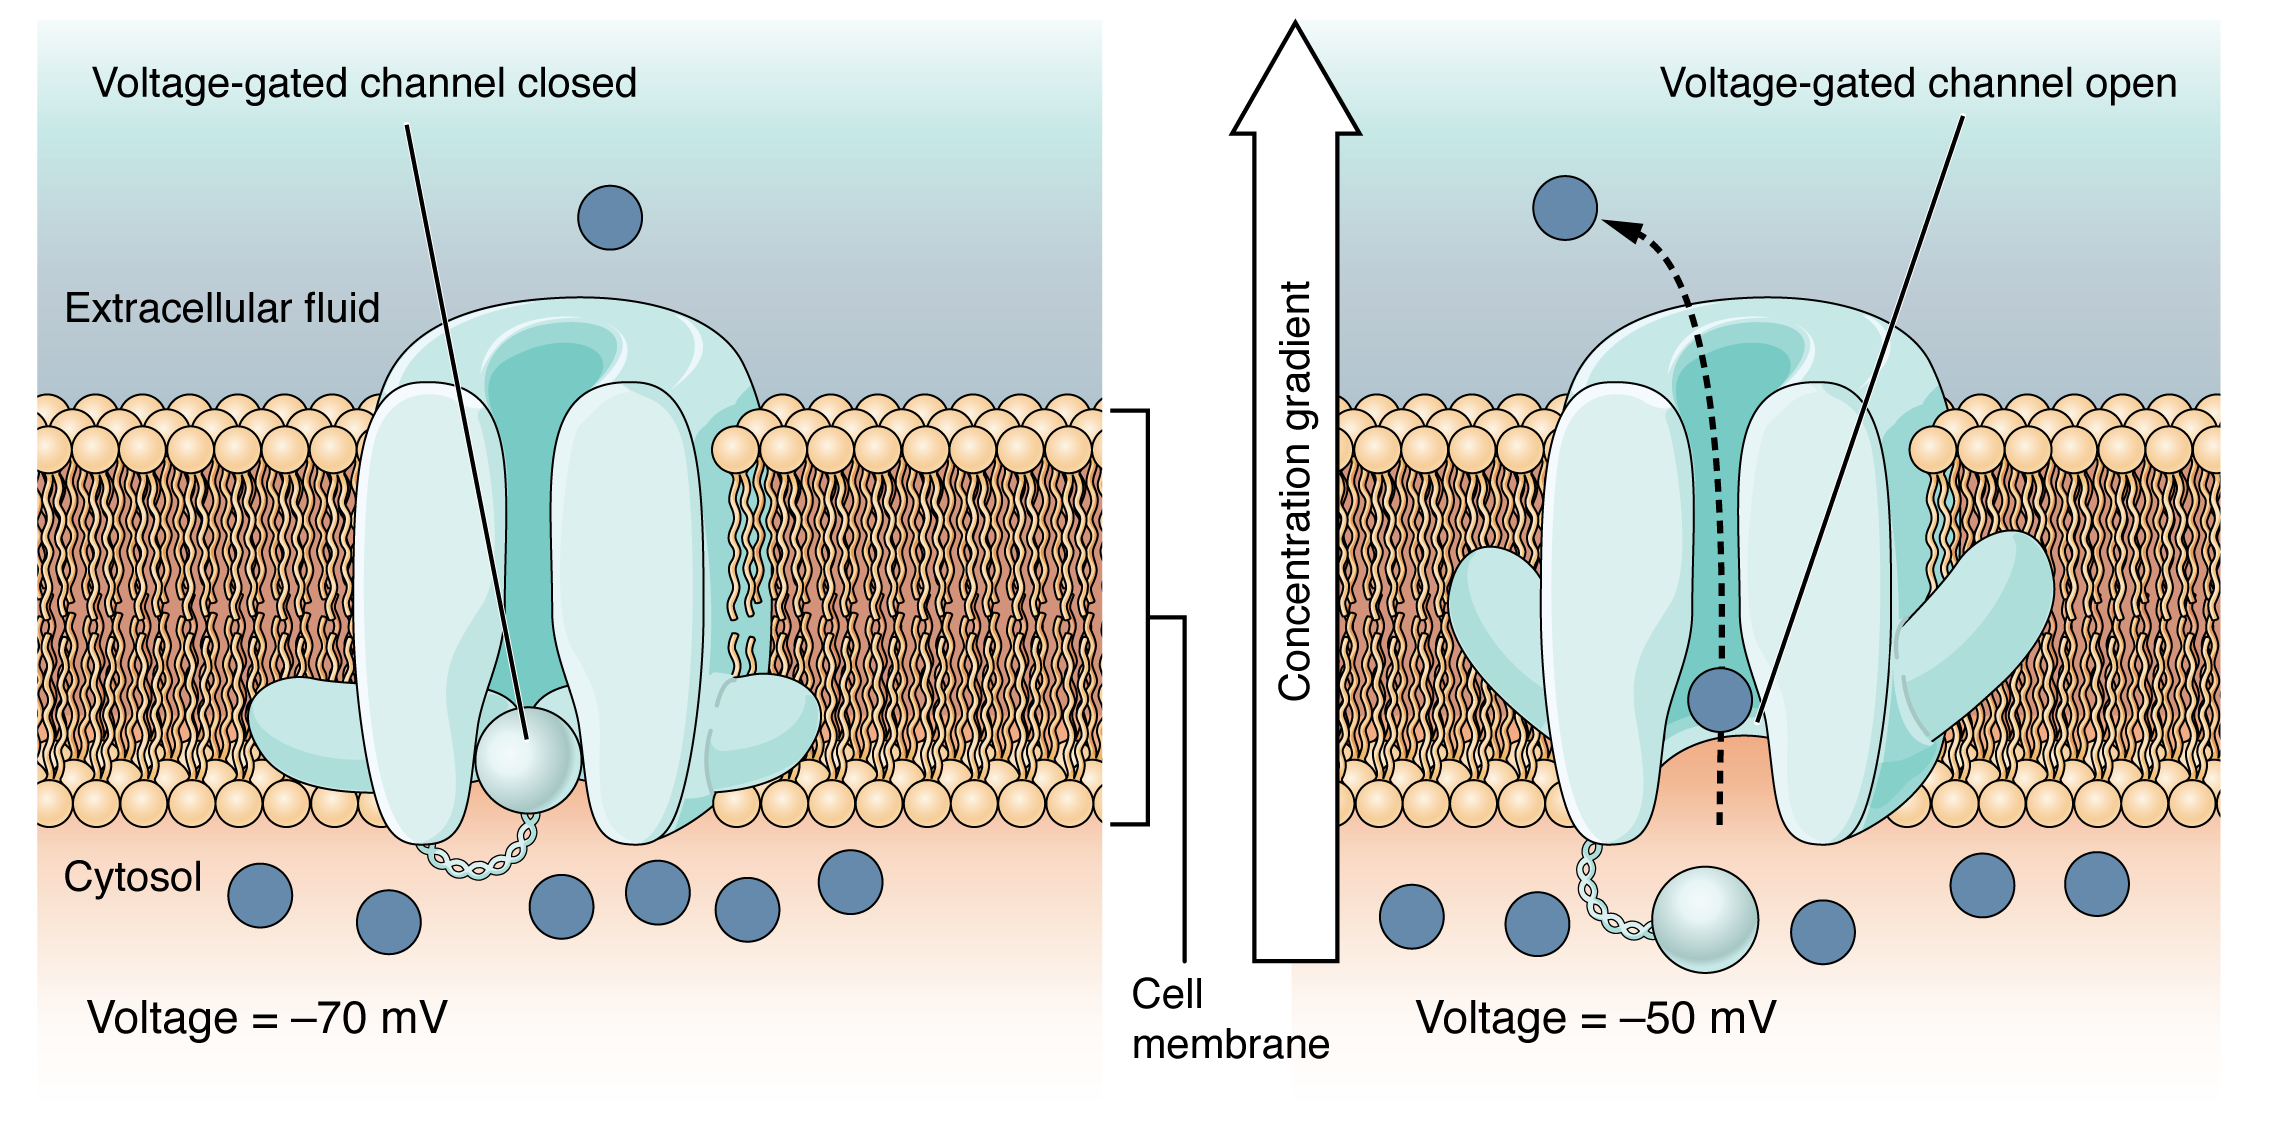 This is a two part diagram. Both diagrams show a voltage gated channel embedded in the lipid membrane bilayer. The channel contains a sphere shaped gate that is attached to a filament. In the first diagram there are several ions in the cytosol but only one ion in the extracellular fluid. The voltage across the membrane is currently minus seventy millivolts and the voltage gated channel is closed. In the second diagram, the voltage in the cytosol is minus fifty millivolts. This voltage change has caused the voltage gated channel to open, as the small sphere is no longer occluding the channel. One of the ions is moving through the channel, down its concentration gradient, and out into the extracellular fluid.